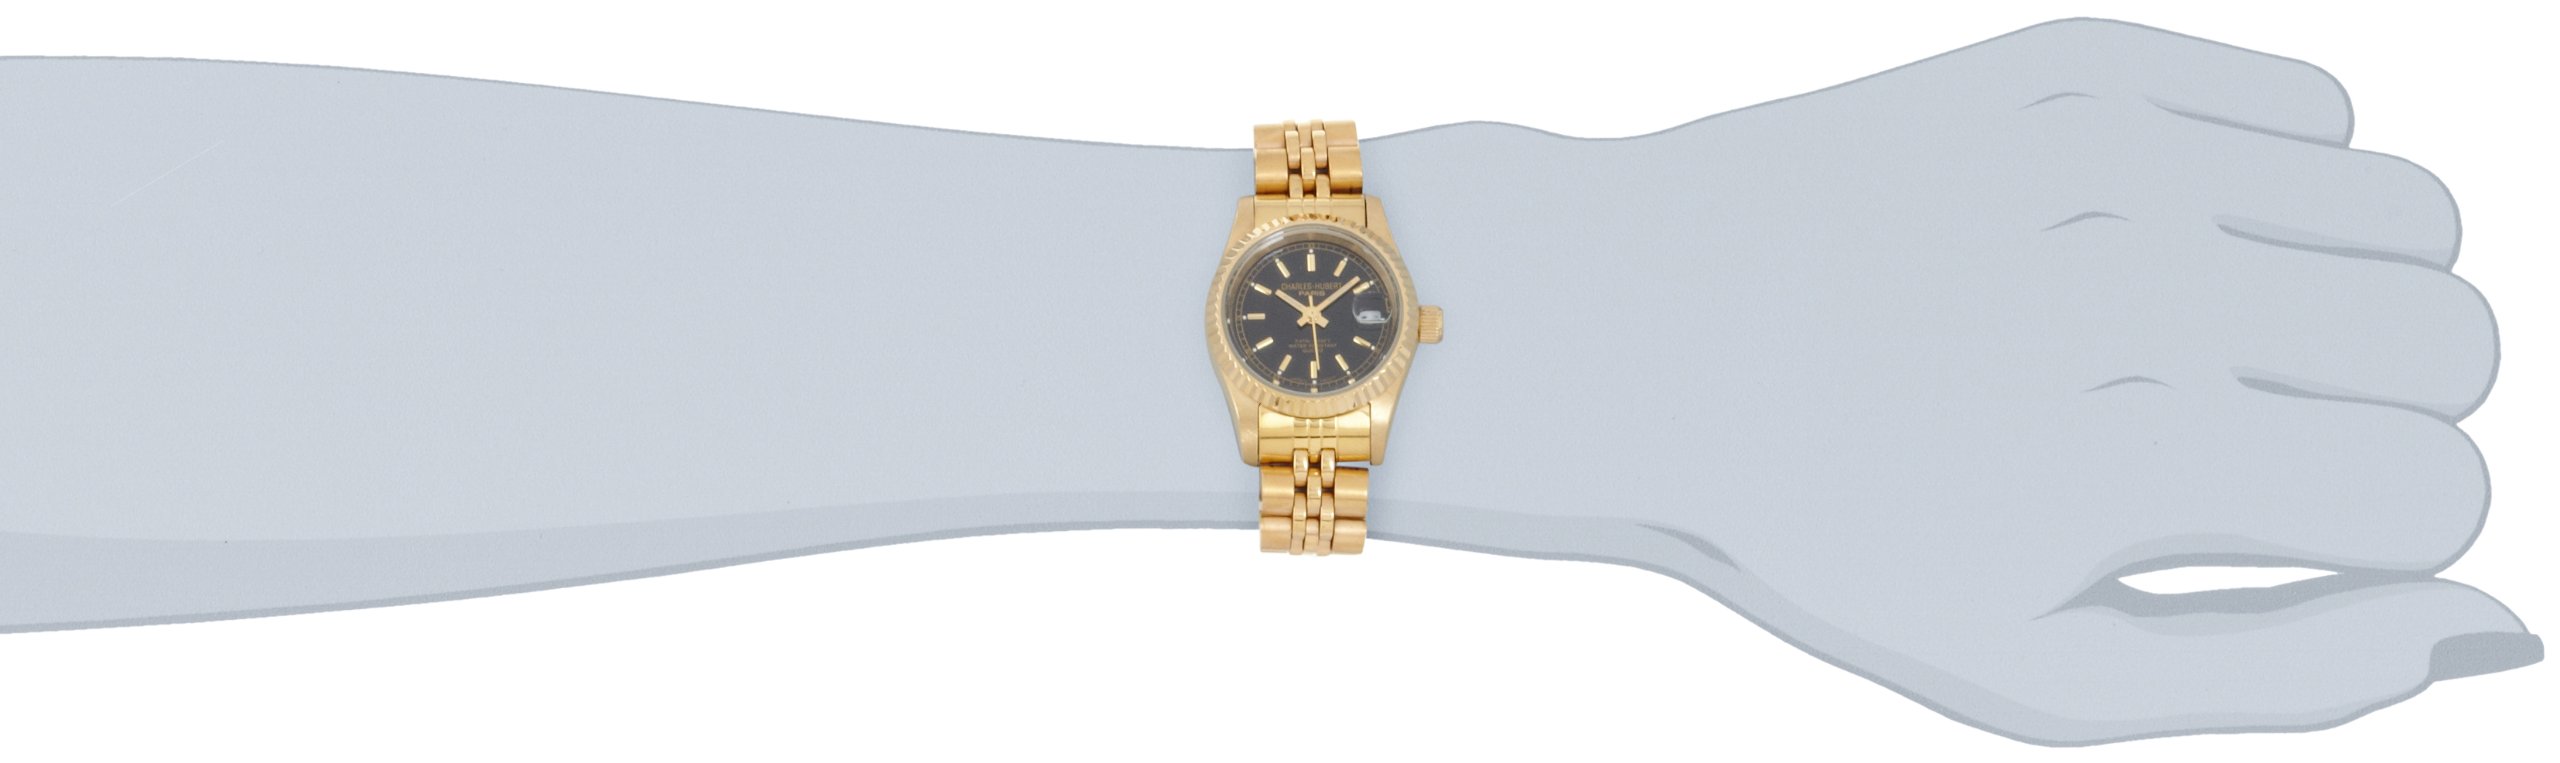 Charles-Hubert, Paris Women's 6635-GB Premium Collection Gold-Plated Stainless Steel Watch